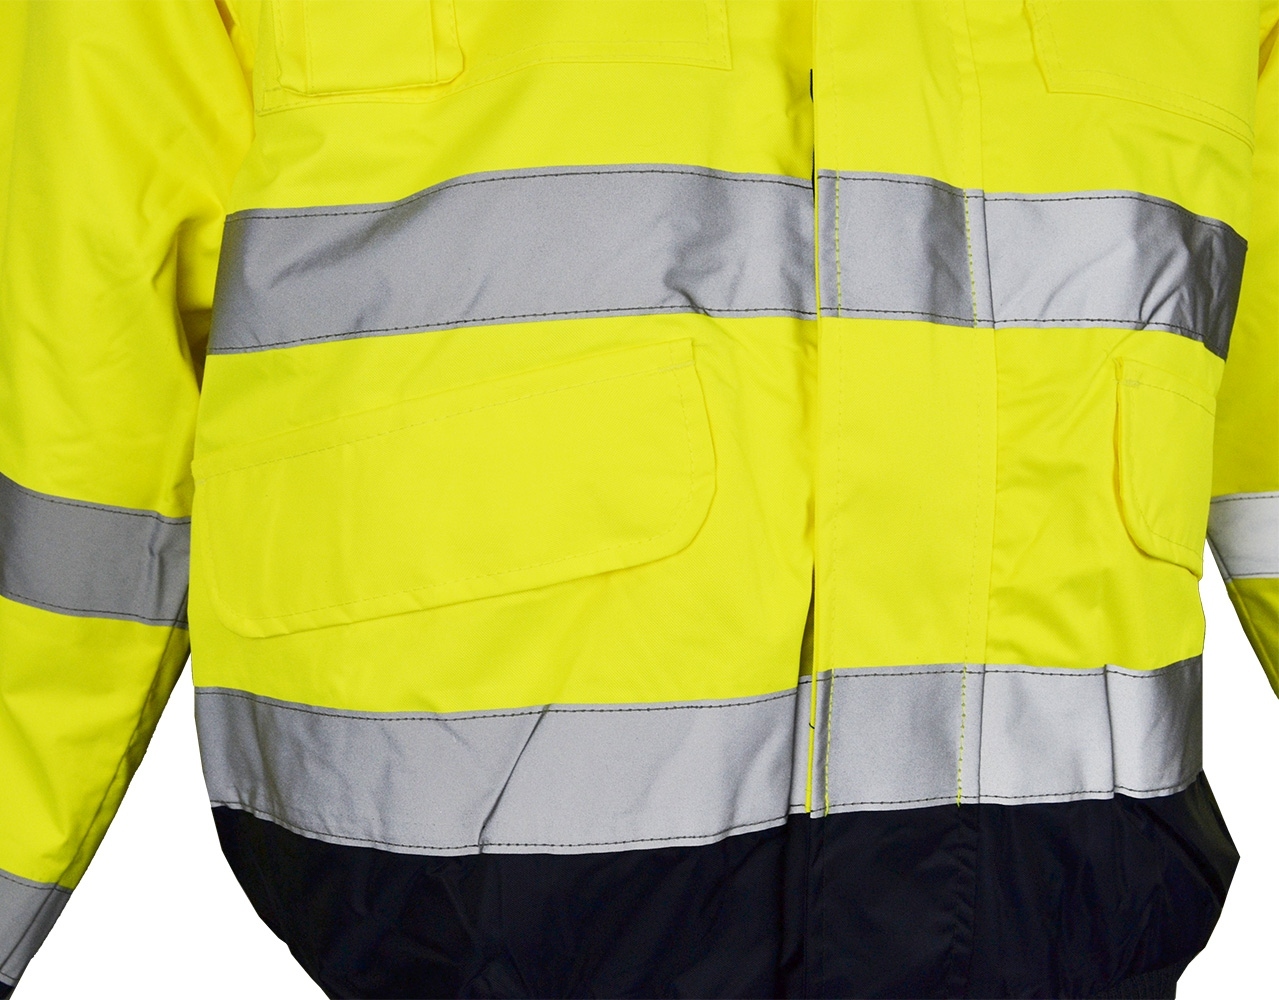 pics/Leipold/480770/leikatex-480770-4-in-1-high-visibility-bomber-jacket-yellow-class-3-details.jpg